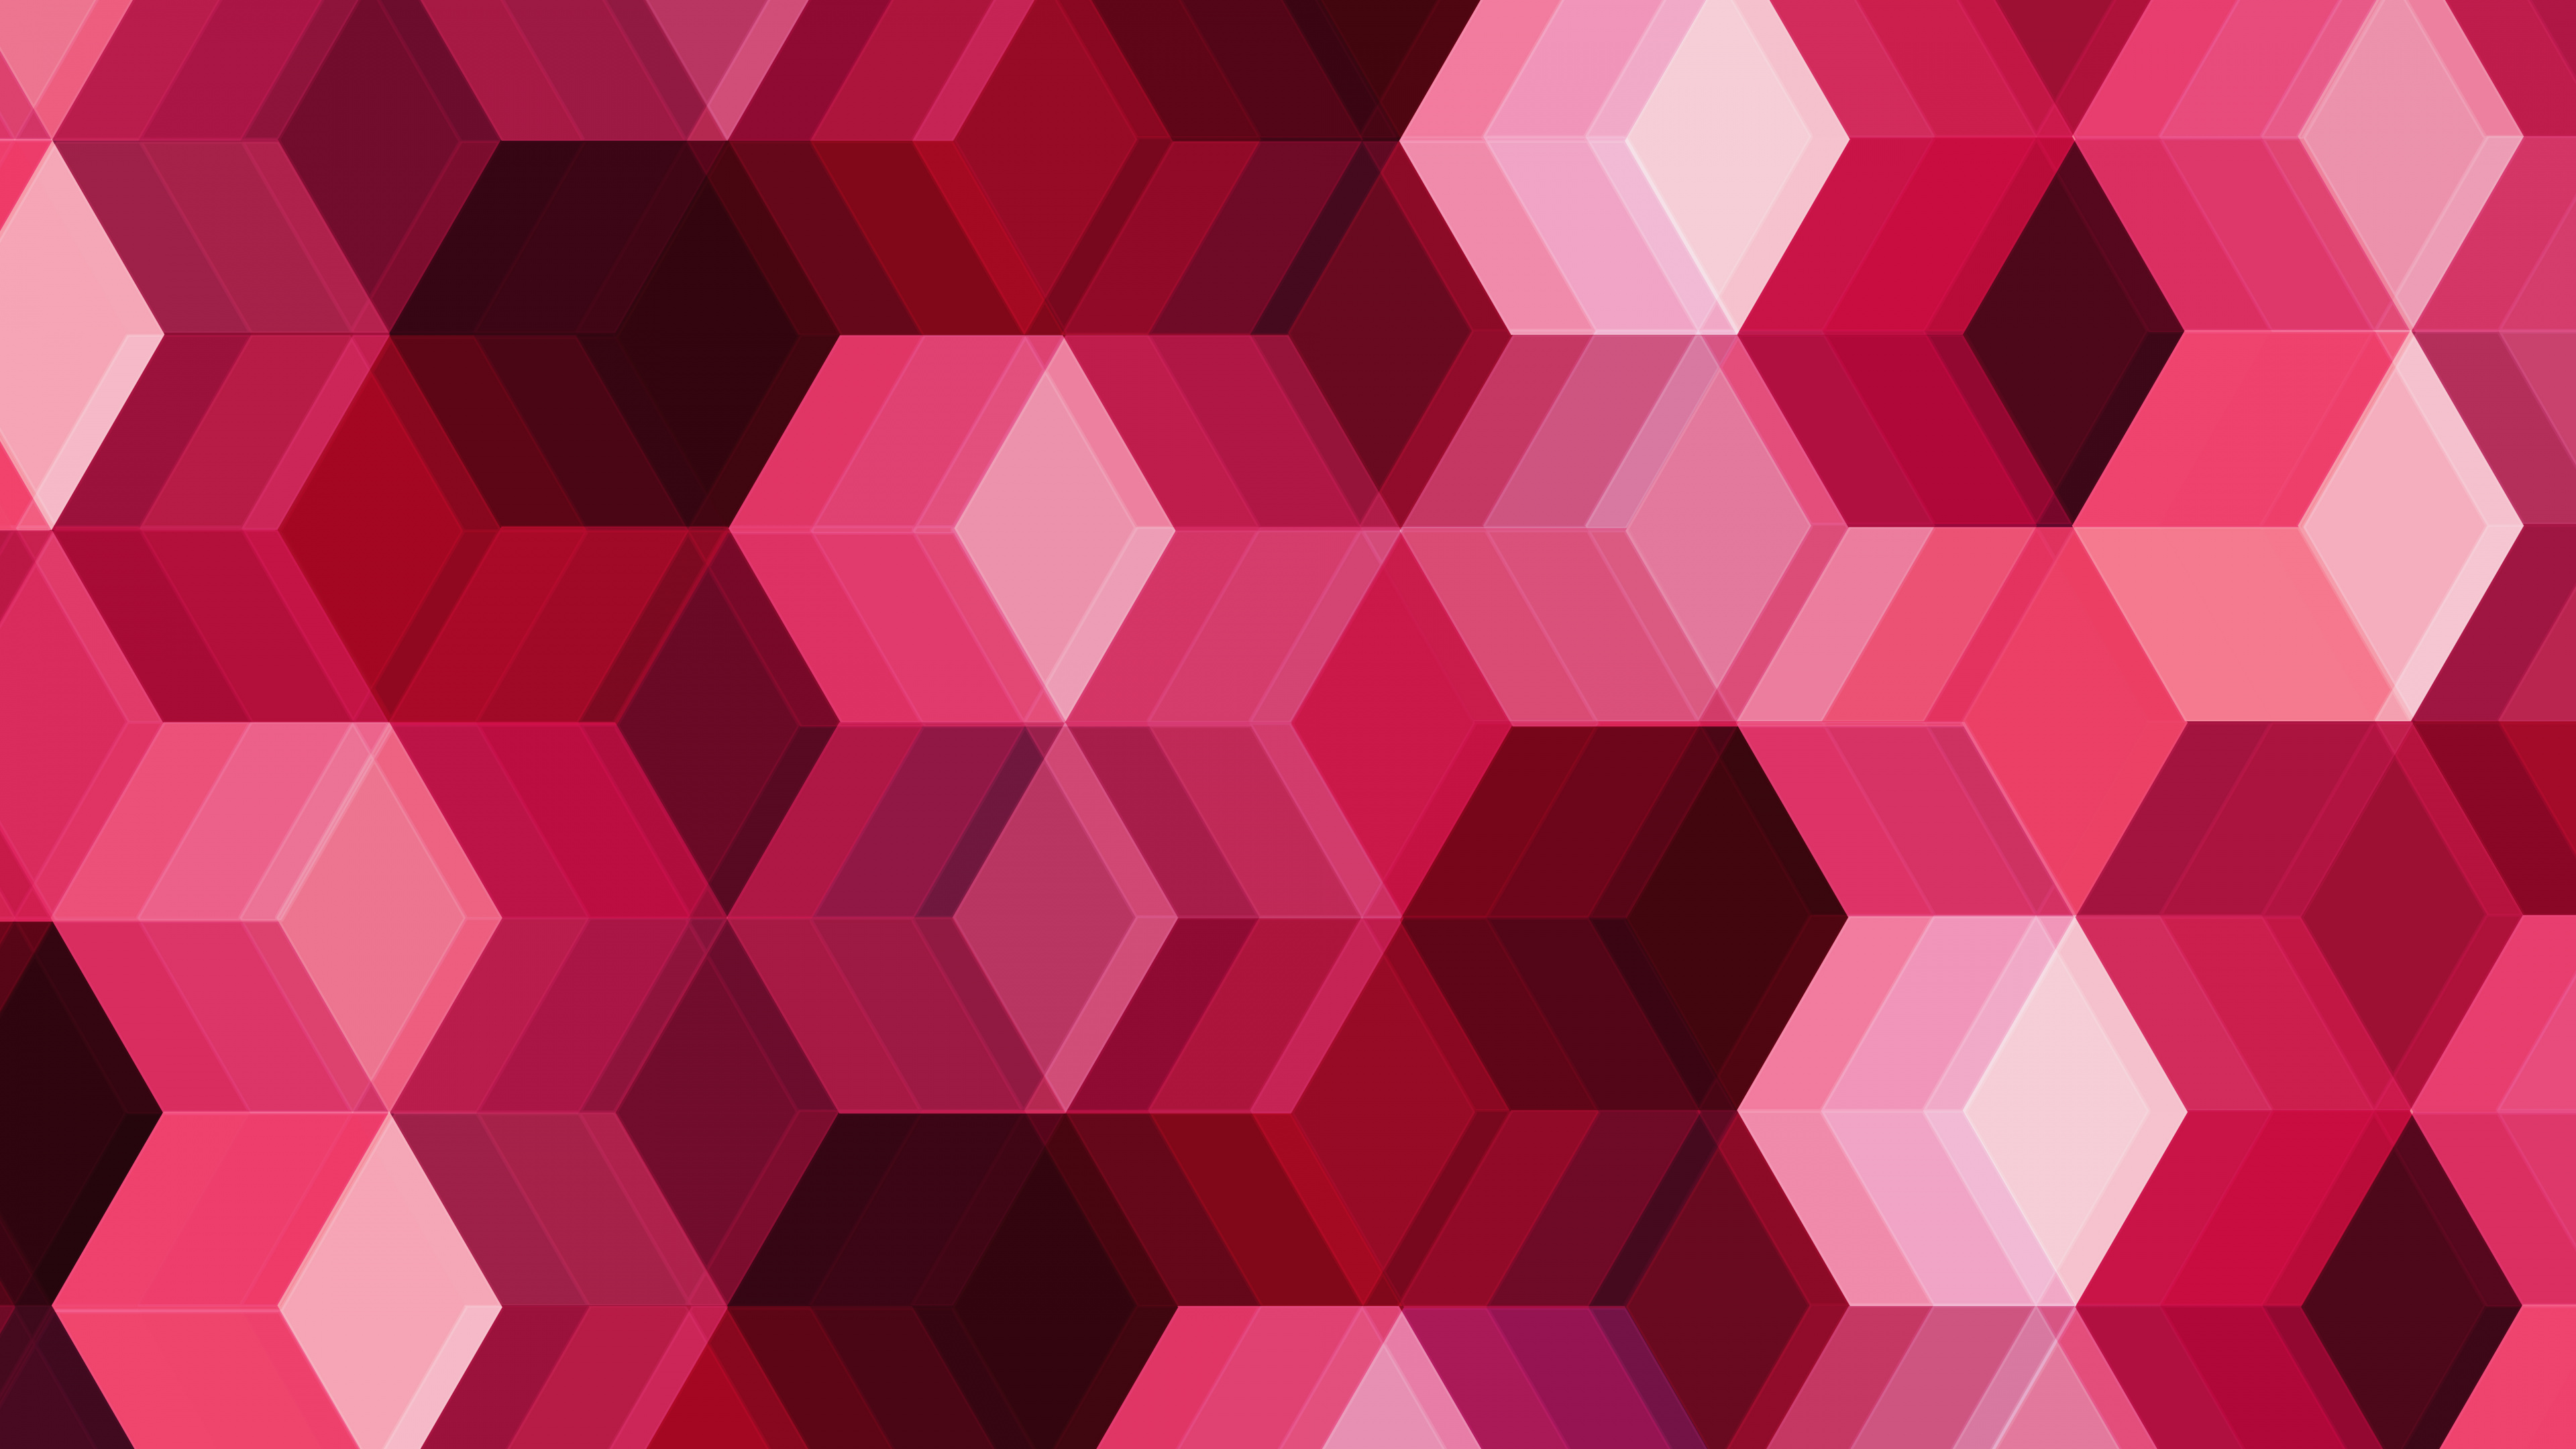 Red and White Checkered Textile. Wallpaper in 3840x2160 Resolution